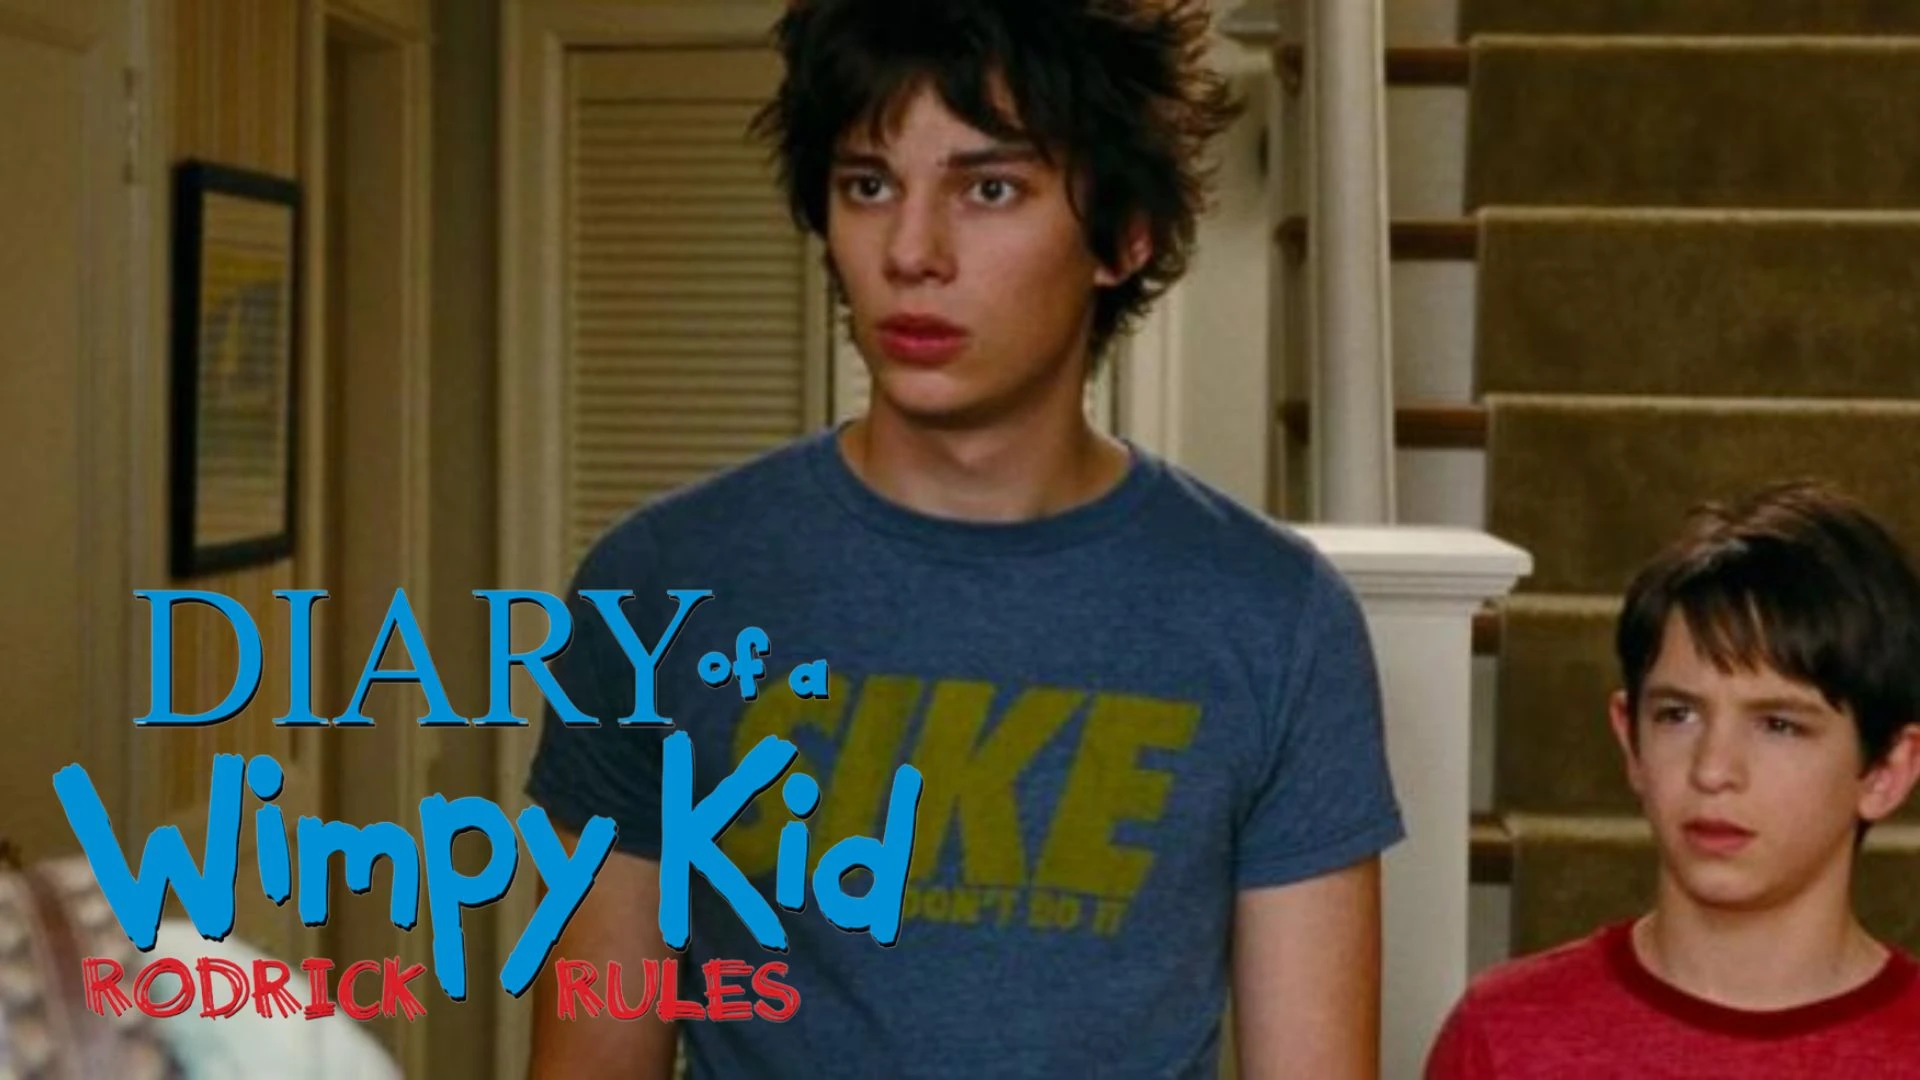 Diary of a Wimpy Kid: Rodrick Rules Parents Guide 2022